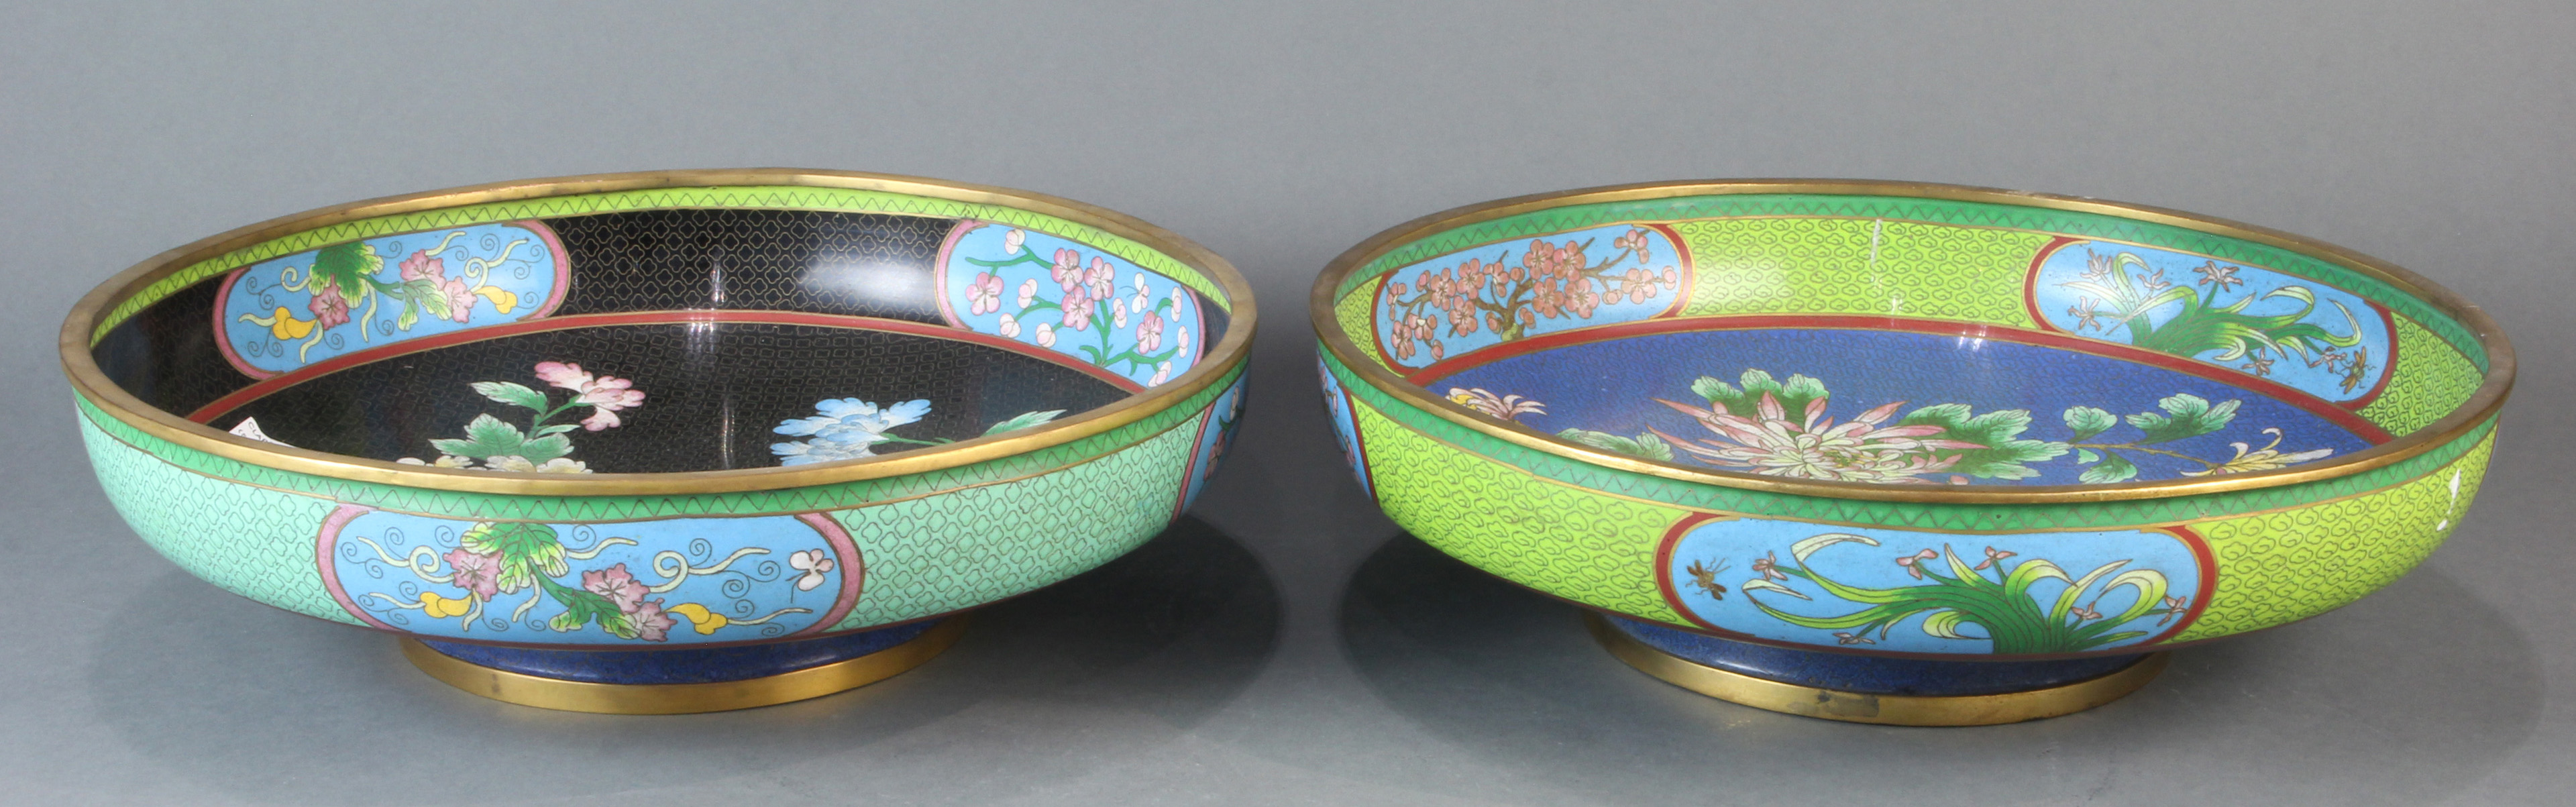 ASSOCIATED PAIR OF CHINESE CLOISONNE 3a6c17